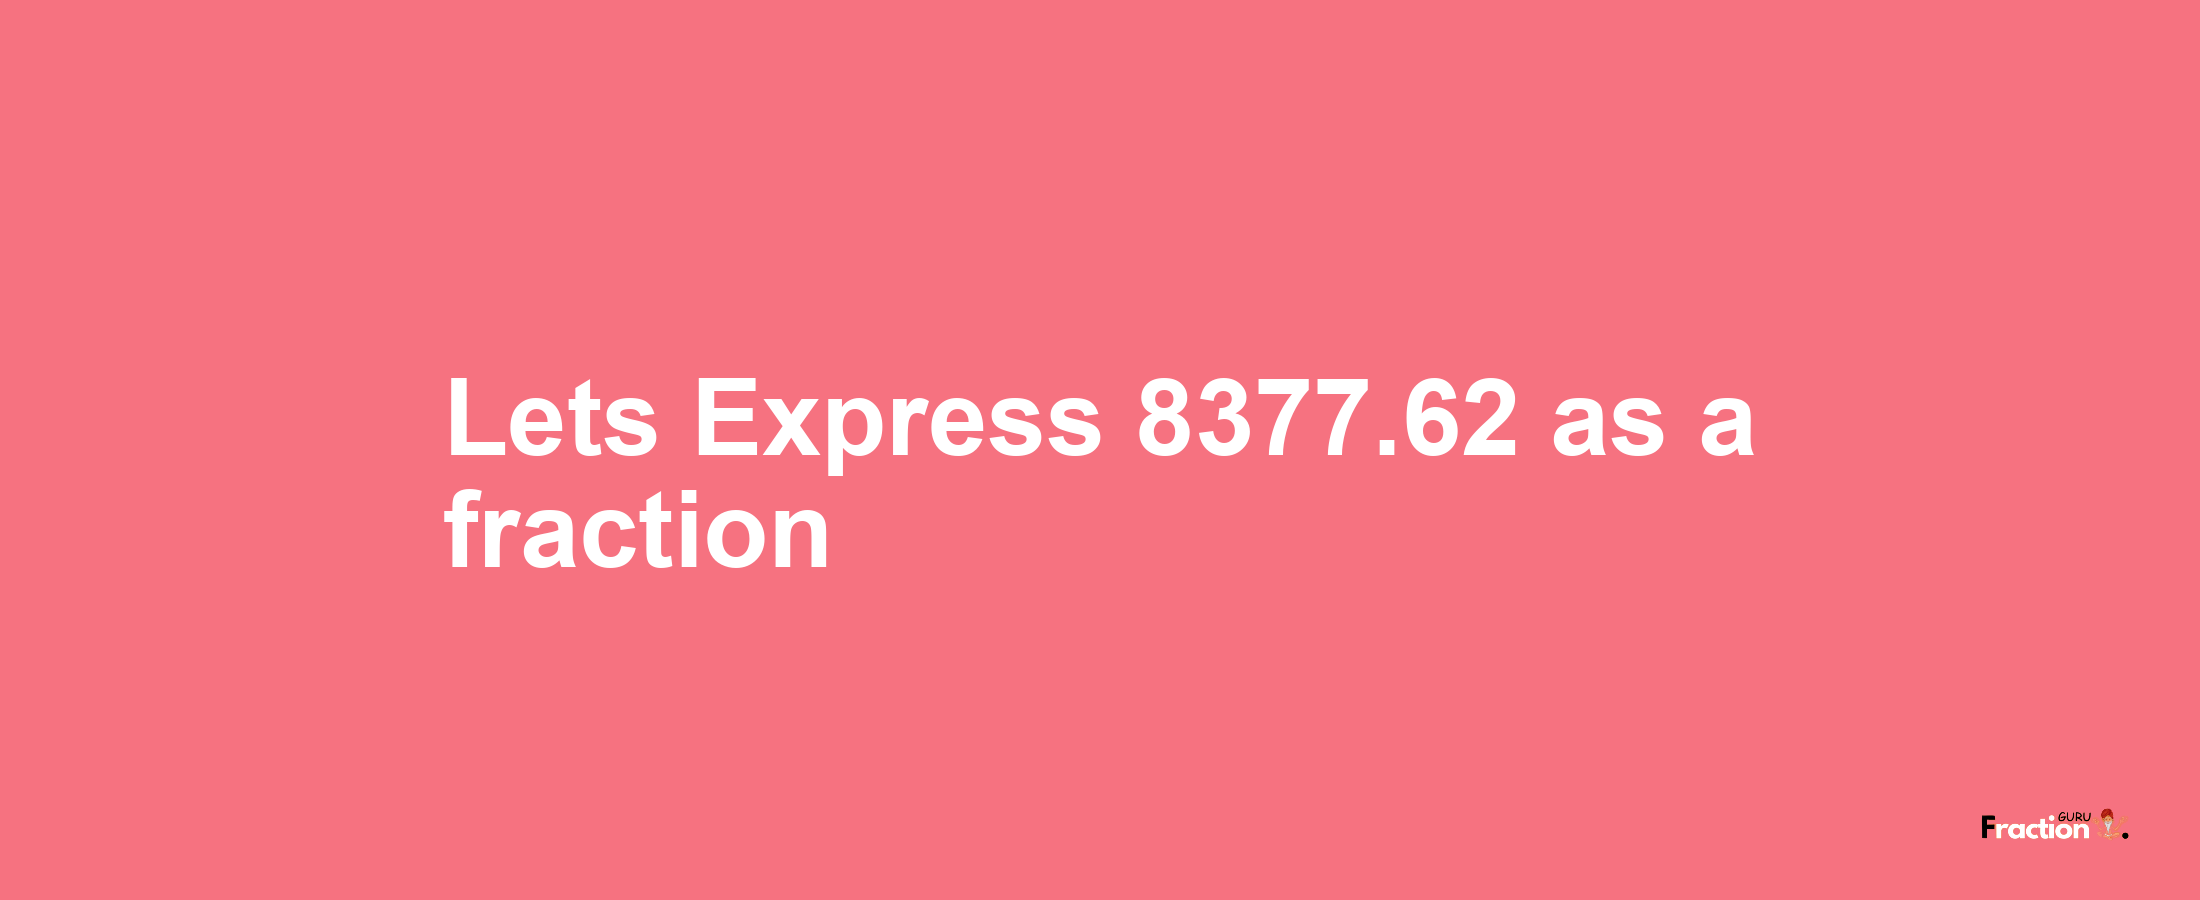 Lets Express 8377.62 as afraction